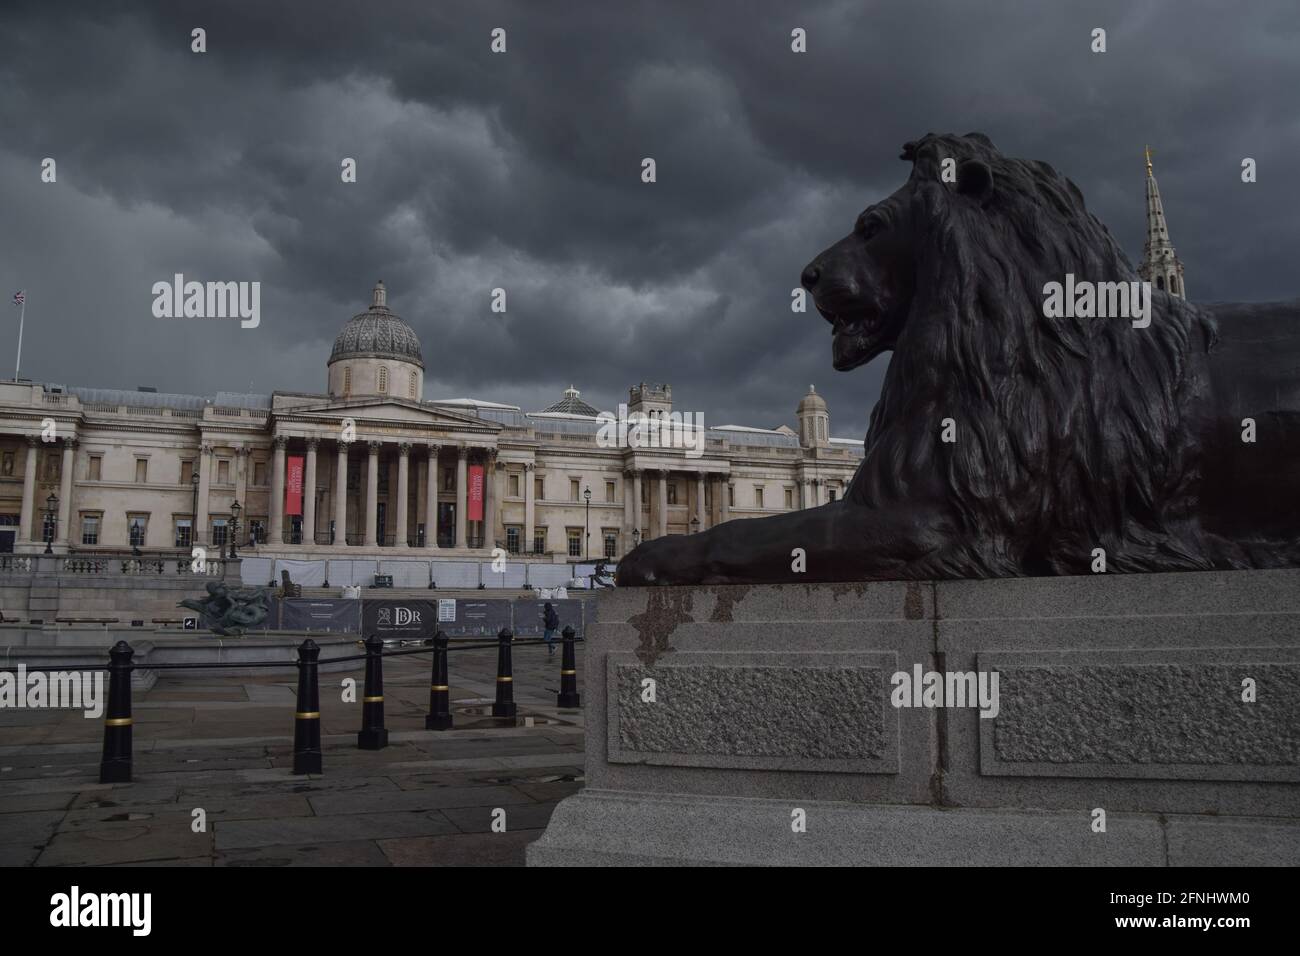 London, United Kingdom. 17th May 2021. Apocalyptic sky over Trafalgar Square as rain and hail fall during a thunderstorm in London. Vuk Valcic / Alamy Live News Stock Photo